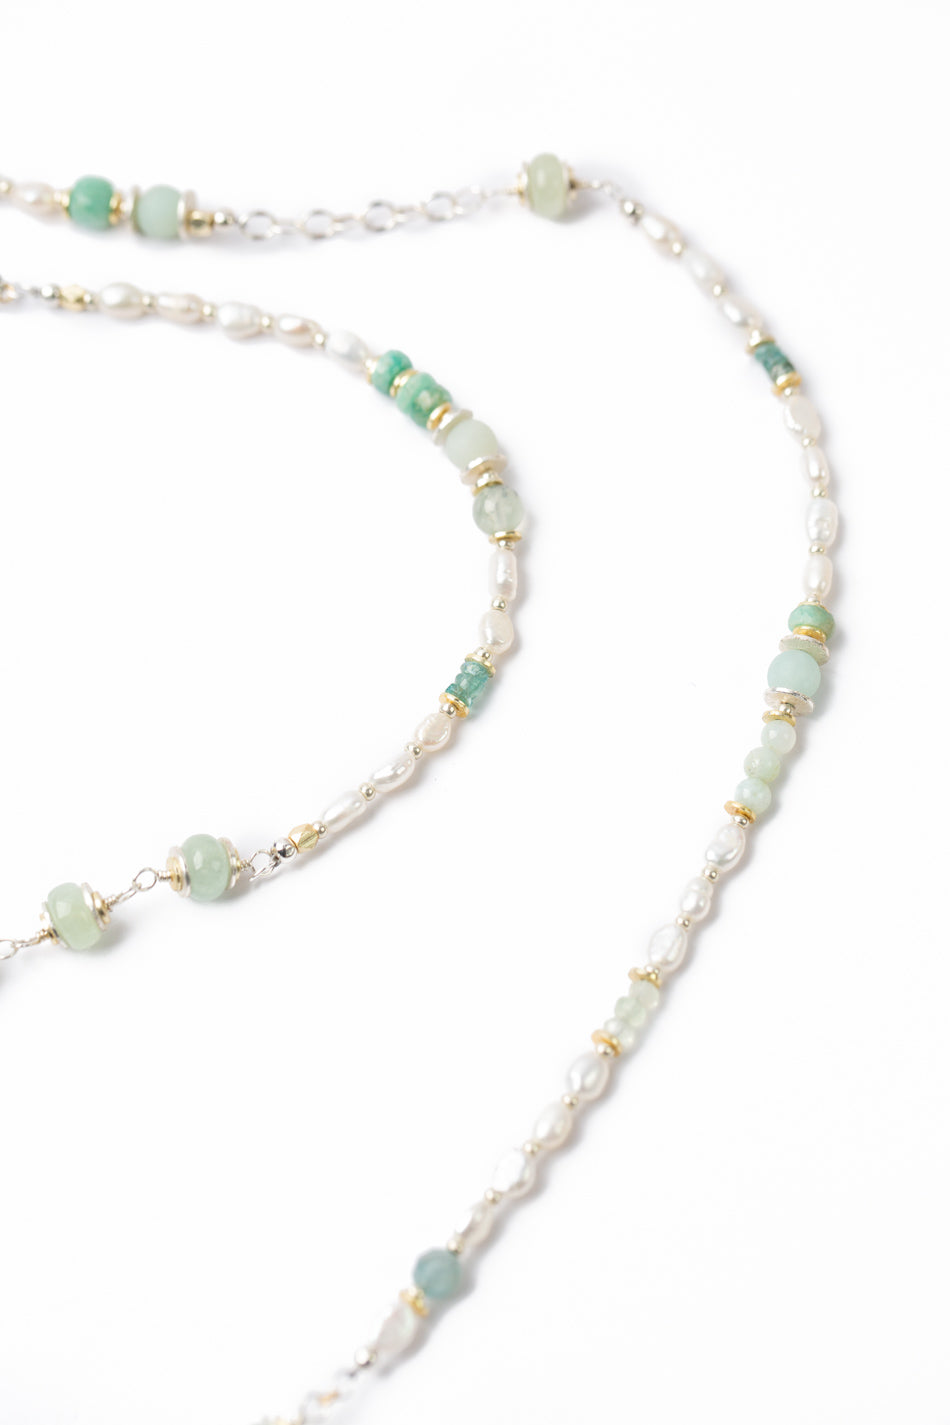 Serenity 37-39" Freshwater Pearl, Blue Apatite, Aquamarine Collage Necklace